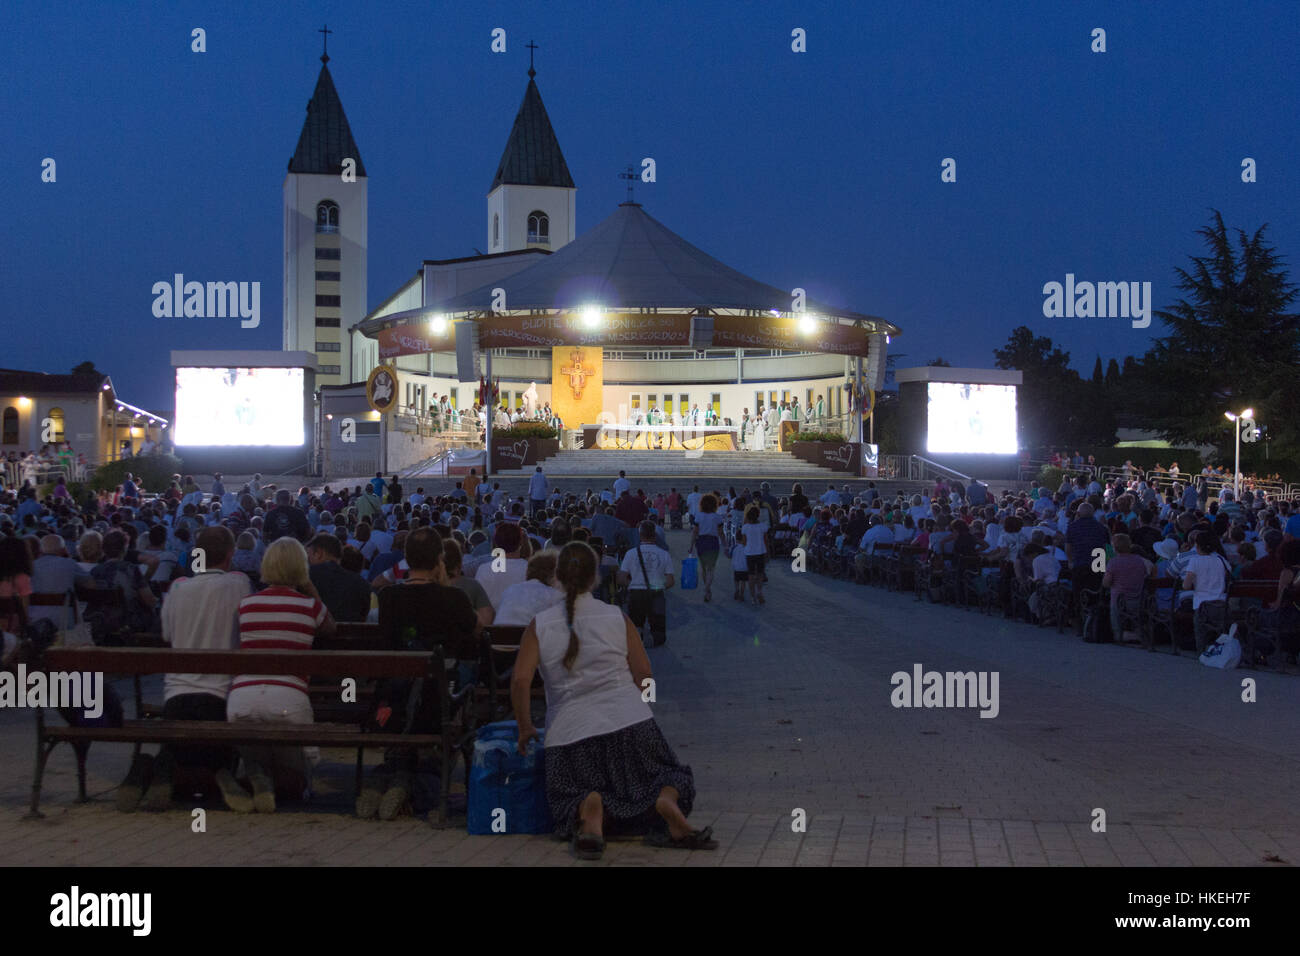 Thousands of pilgrims attending a holy mass and adoration in the evening gathered on the square behind the Saint James church. Stock Photo